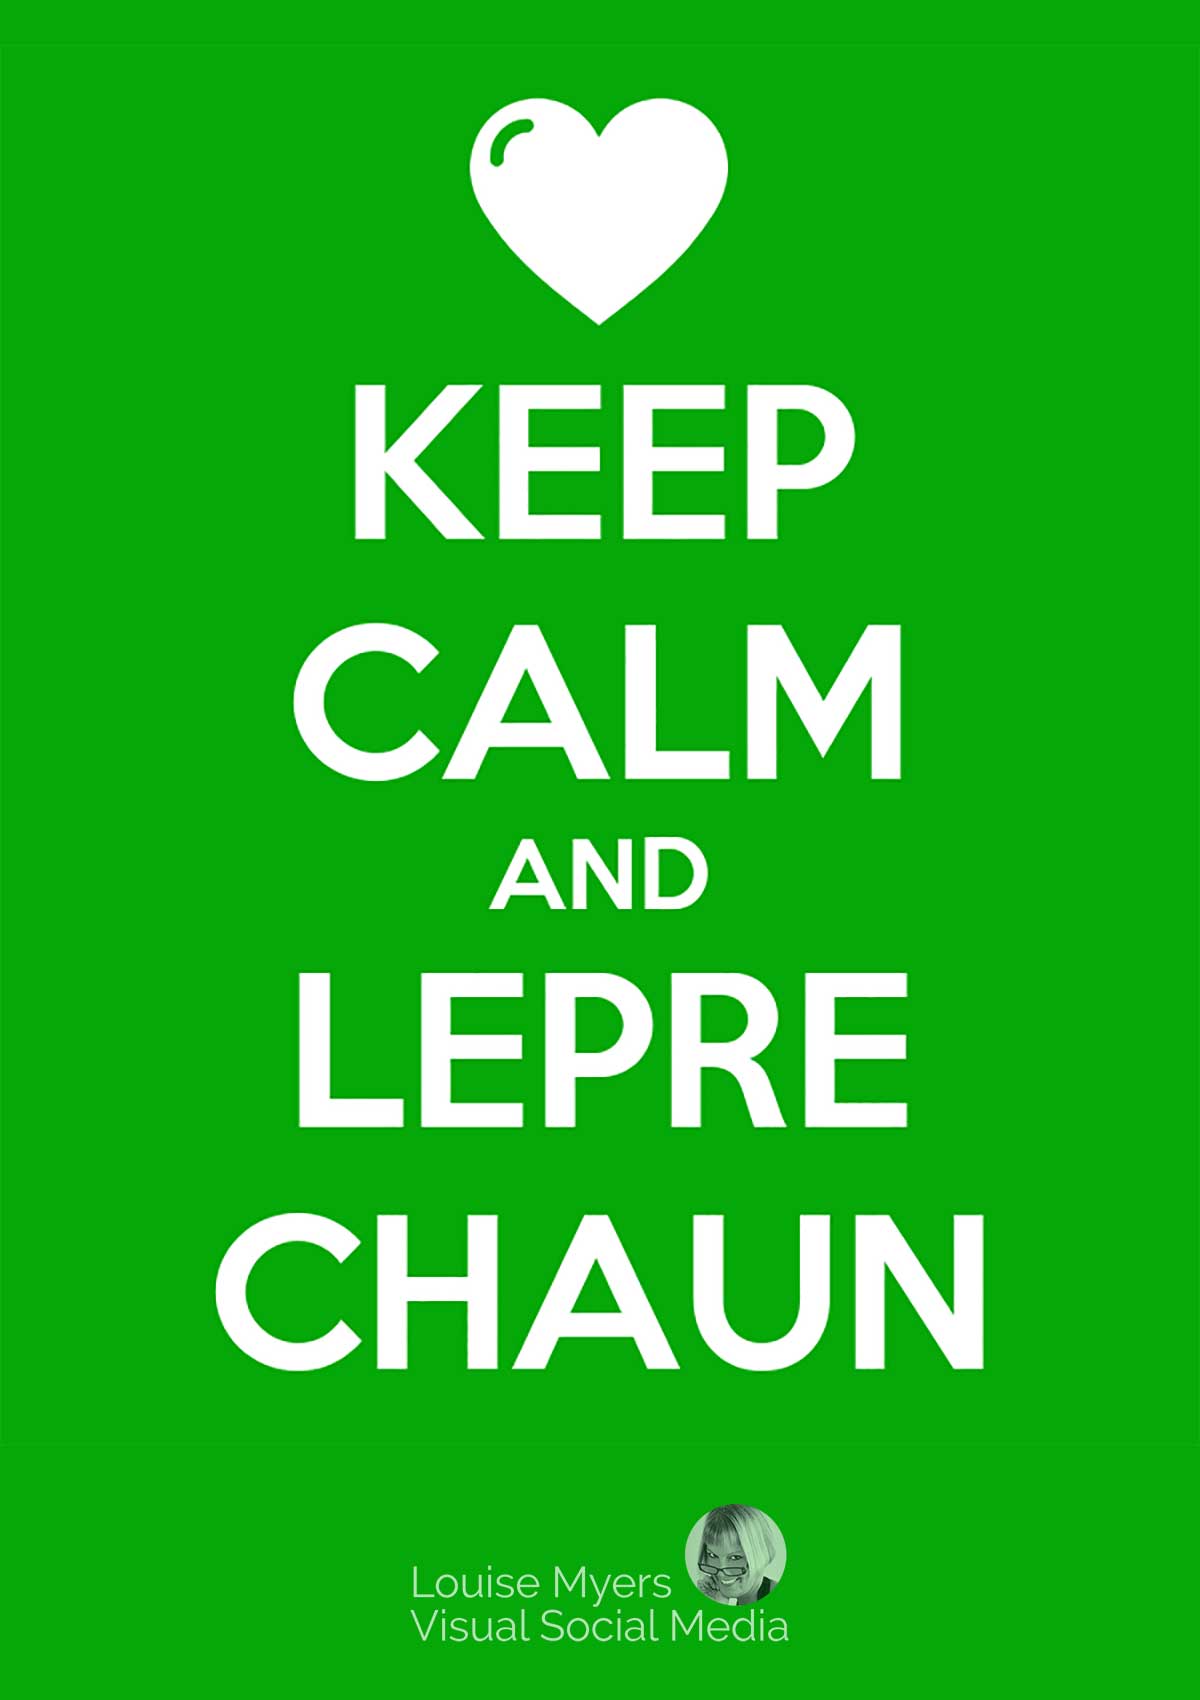 keep calm and leprechaun on bright green background.